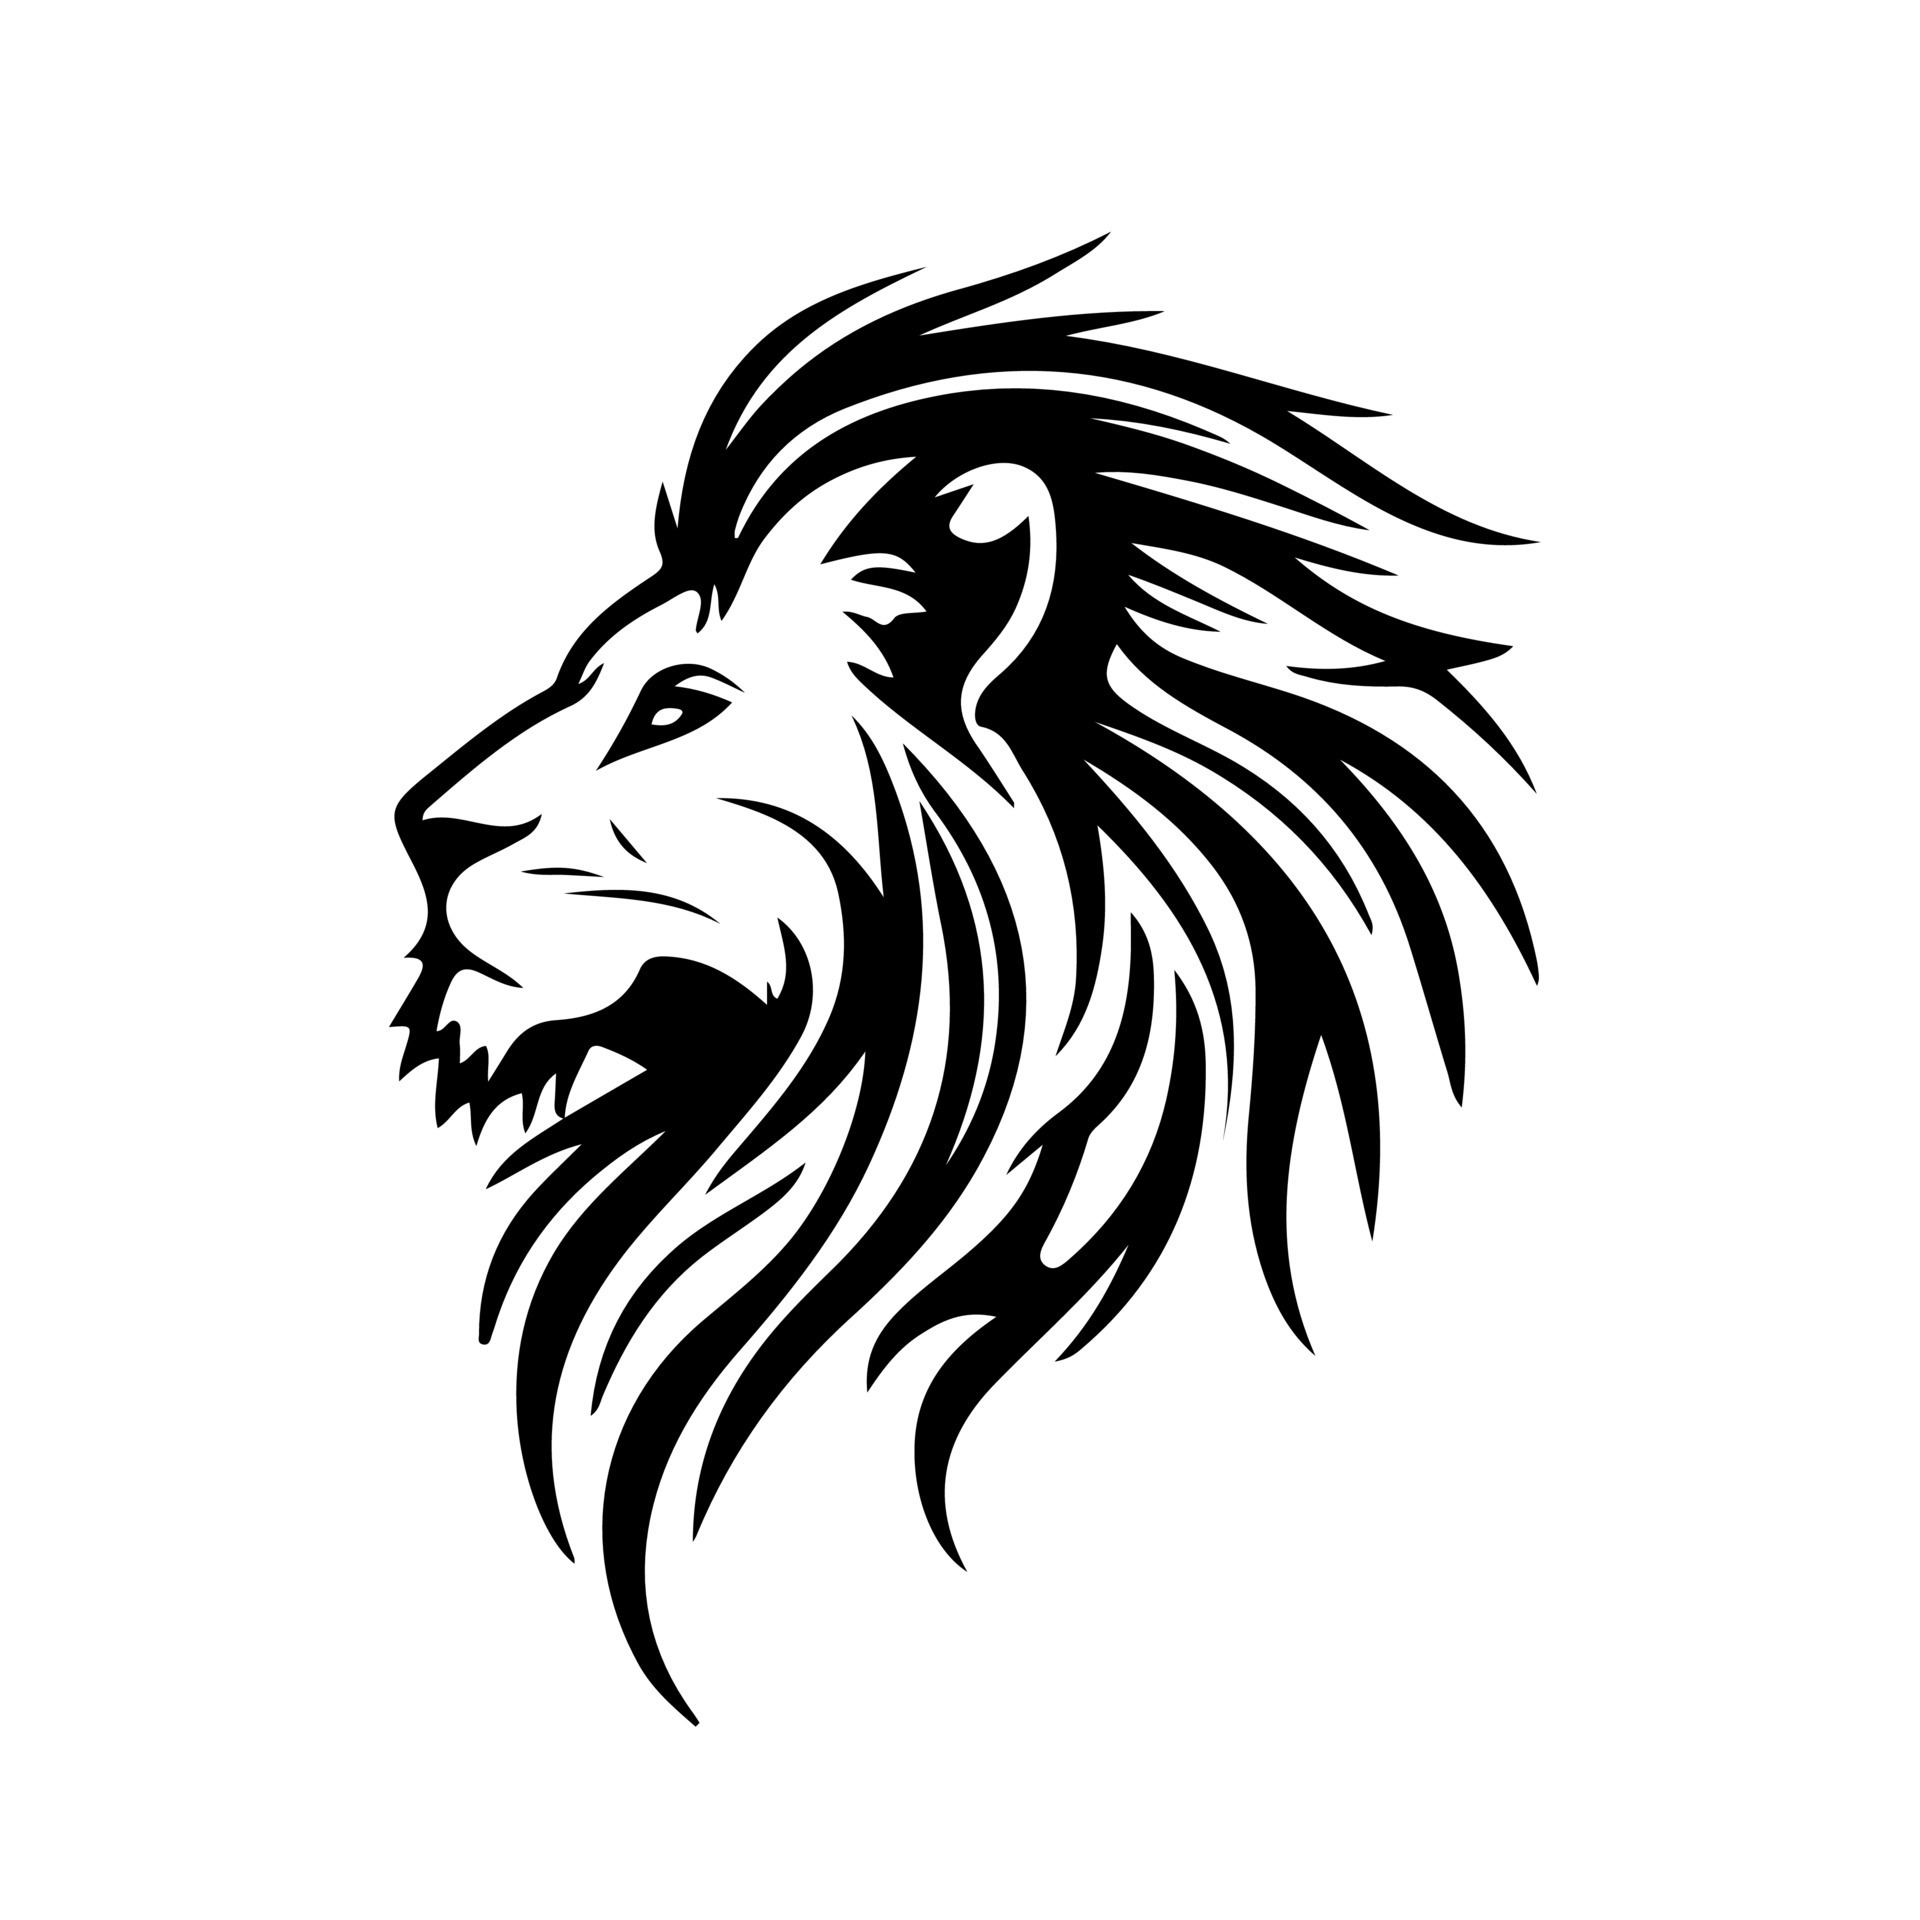 70 Fierce Lion Tattoos For The King or Queen in You  Inspirationfeed